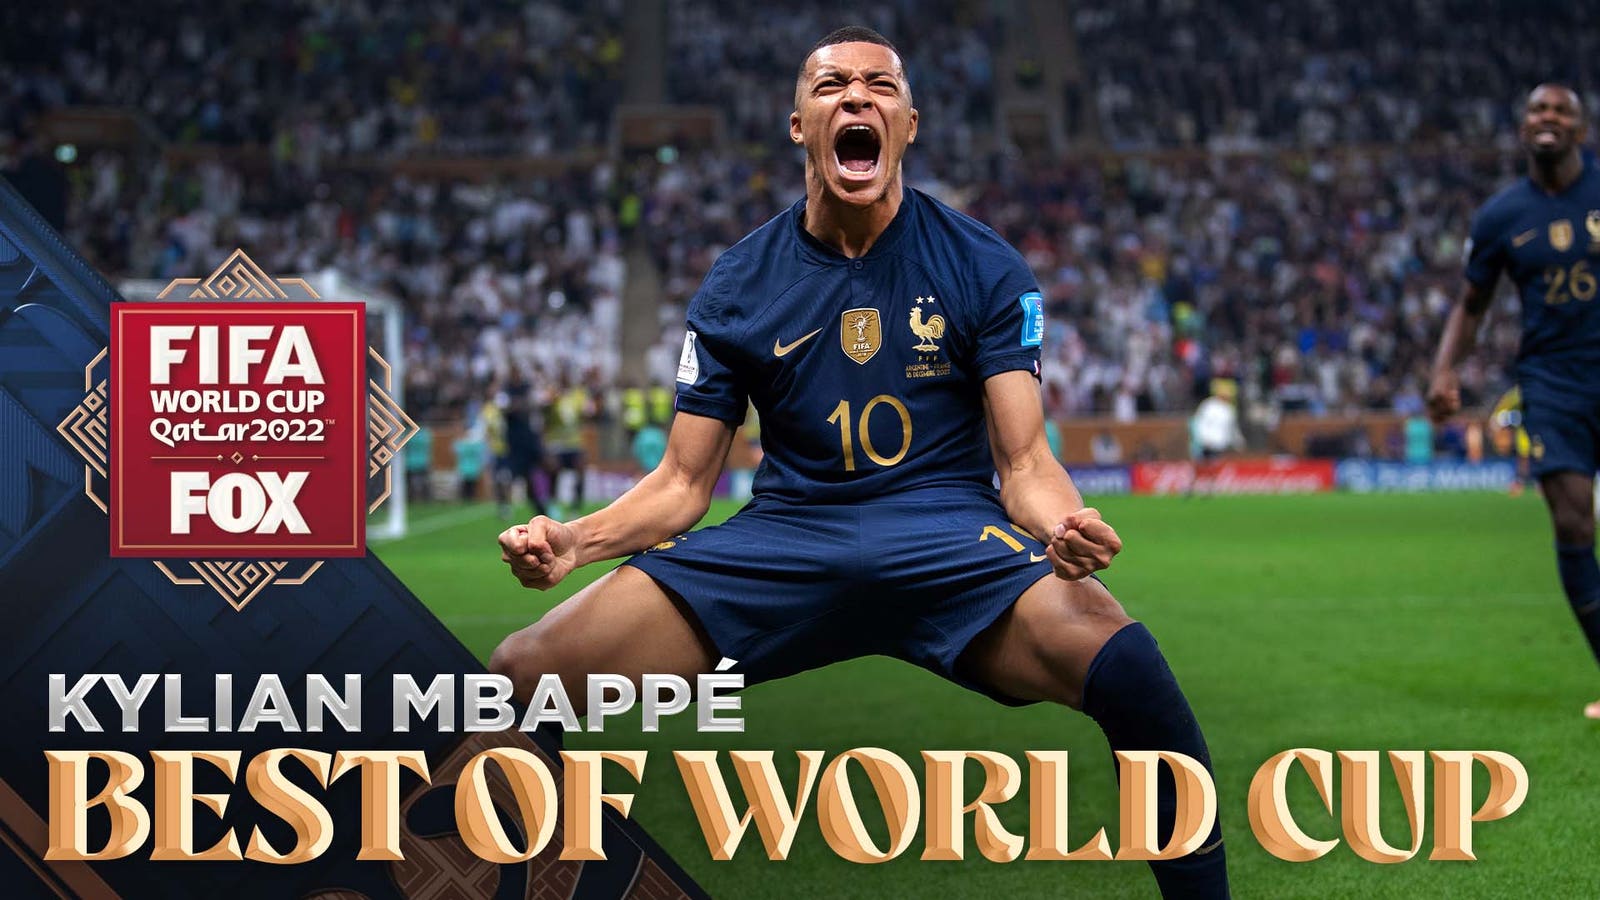 The best of Kylian Mbappé at the 2022 World Cup